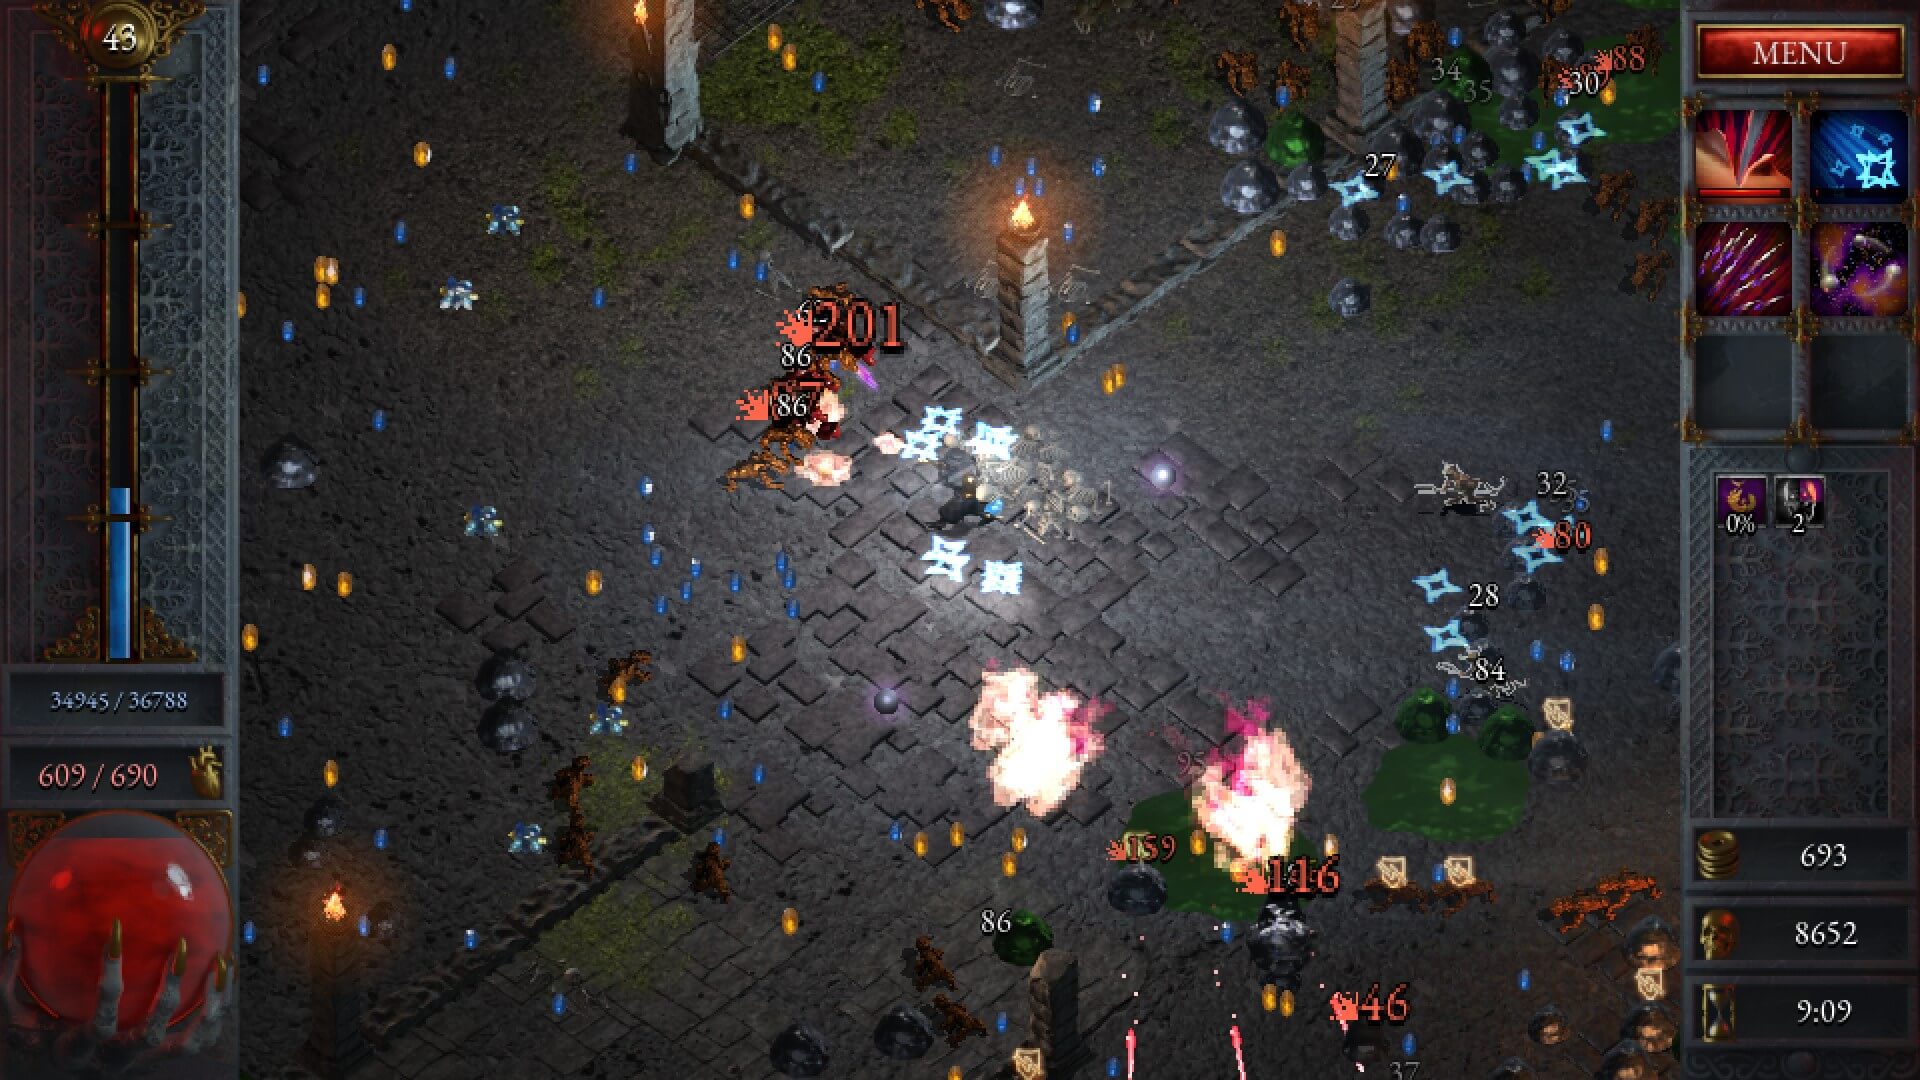 The player character stands in the middle of the screen surrounded by enemies all around while attacking with a flamethrower. Experience vials or gems are littered about the area to collect. The player's XP bar and health pool are on the left whereas the abilities and counters are on the right of the screen.